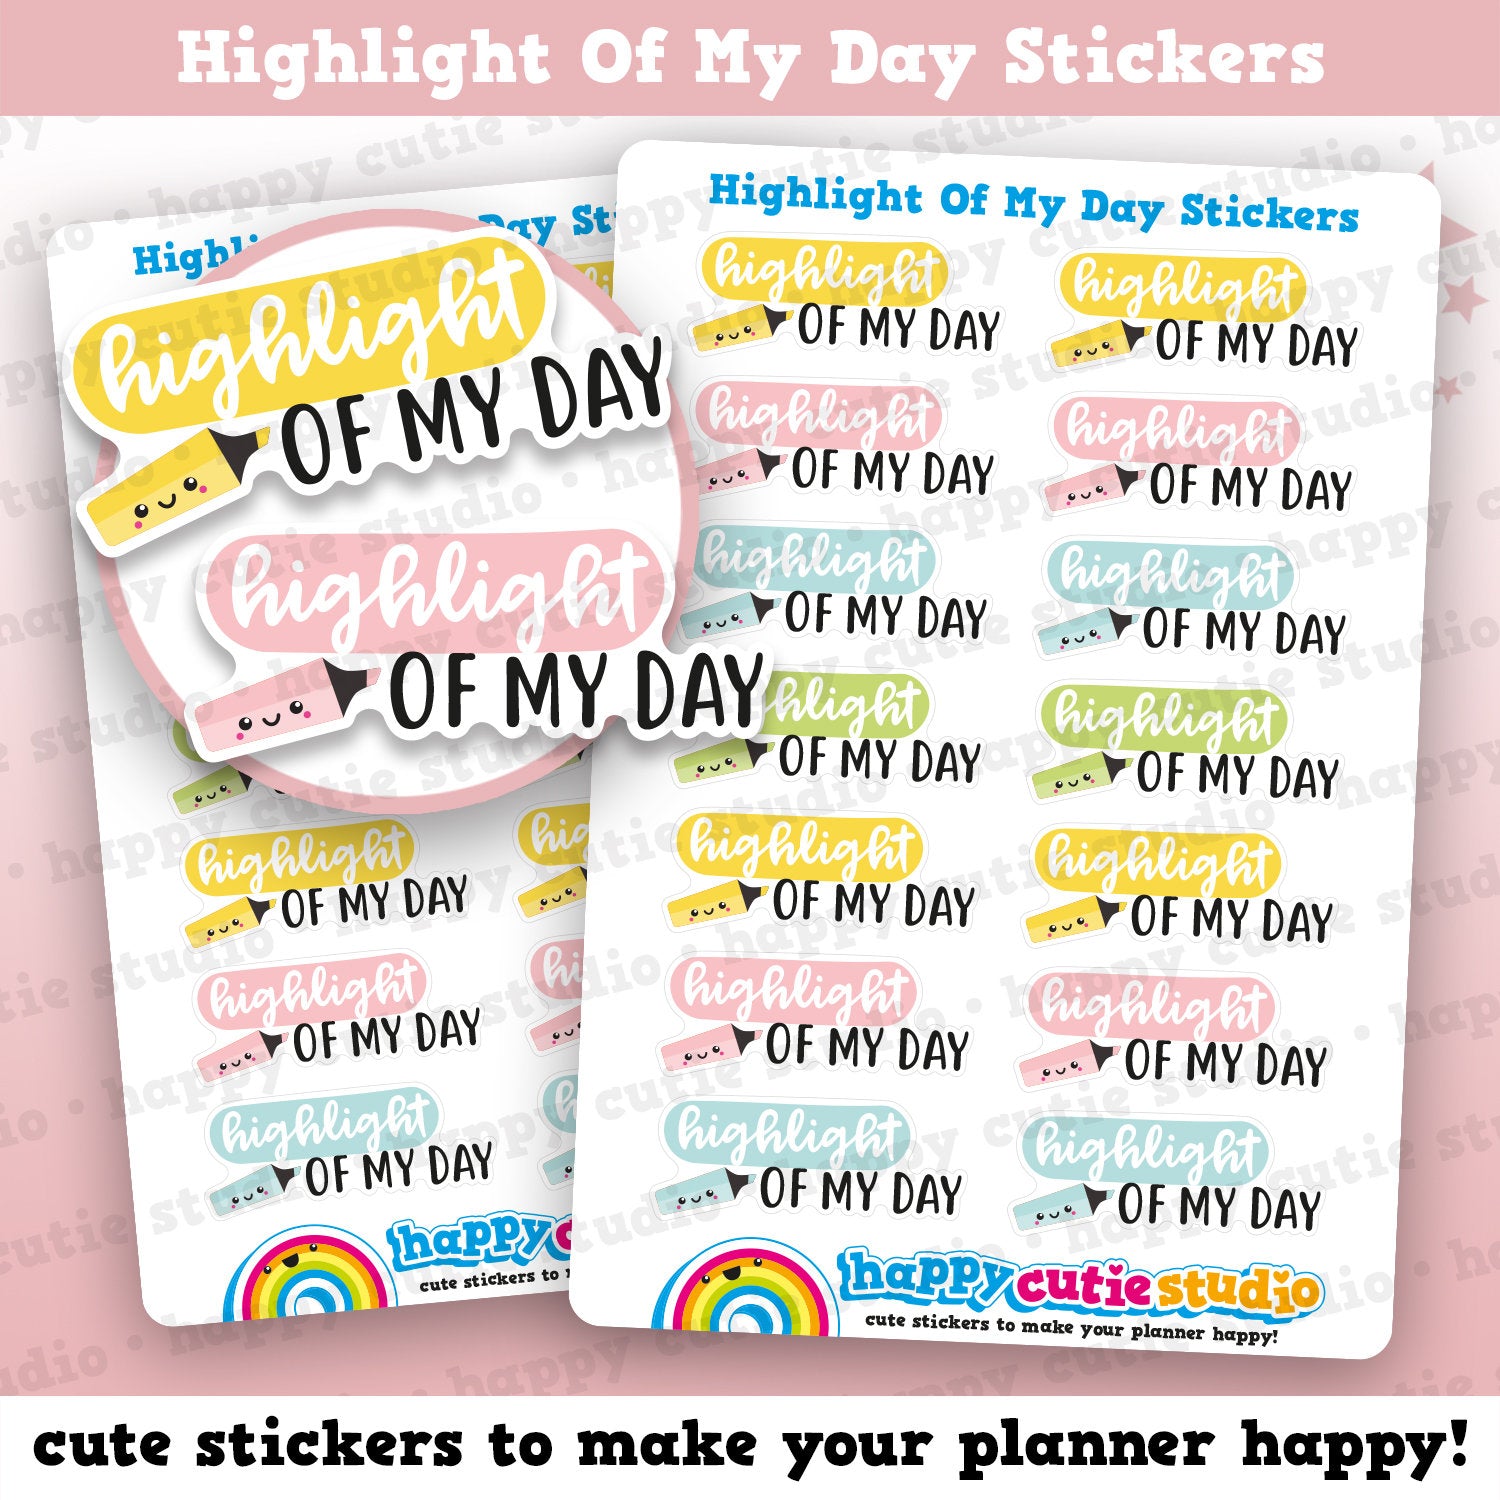 14 Cute Highlight of my Day Planner Stickers